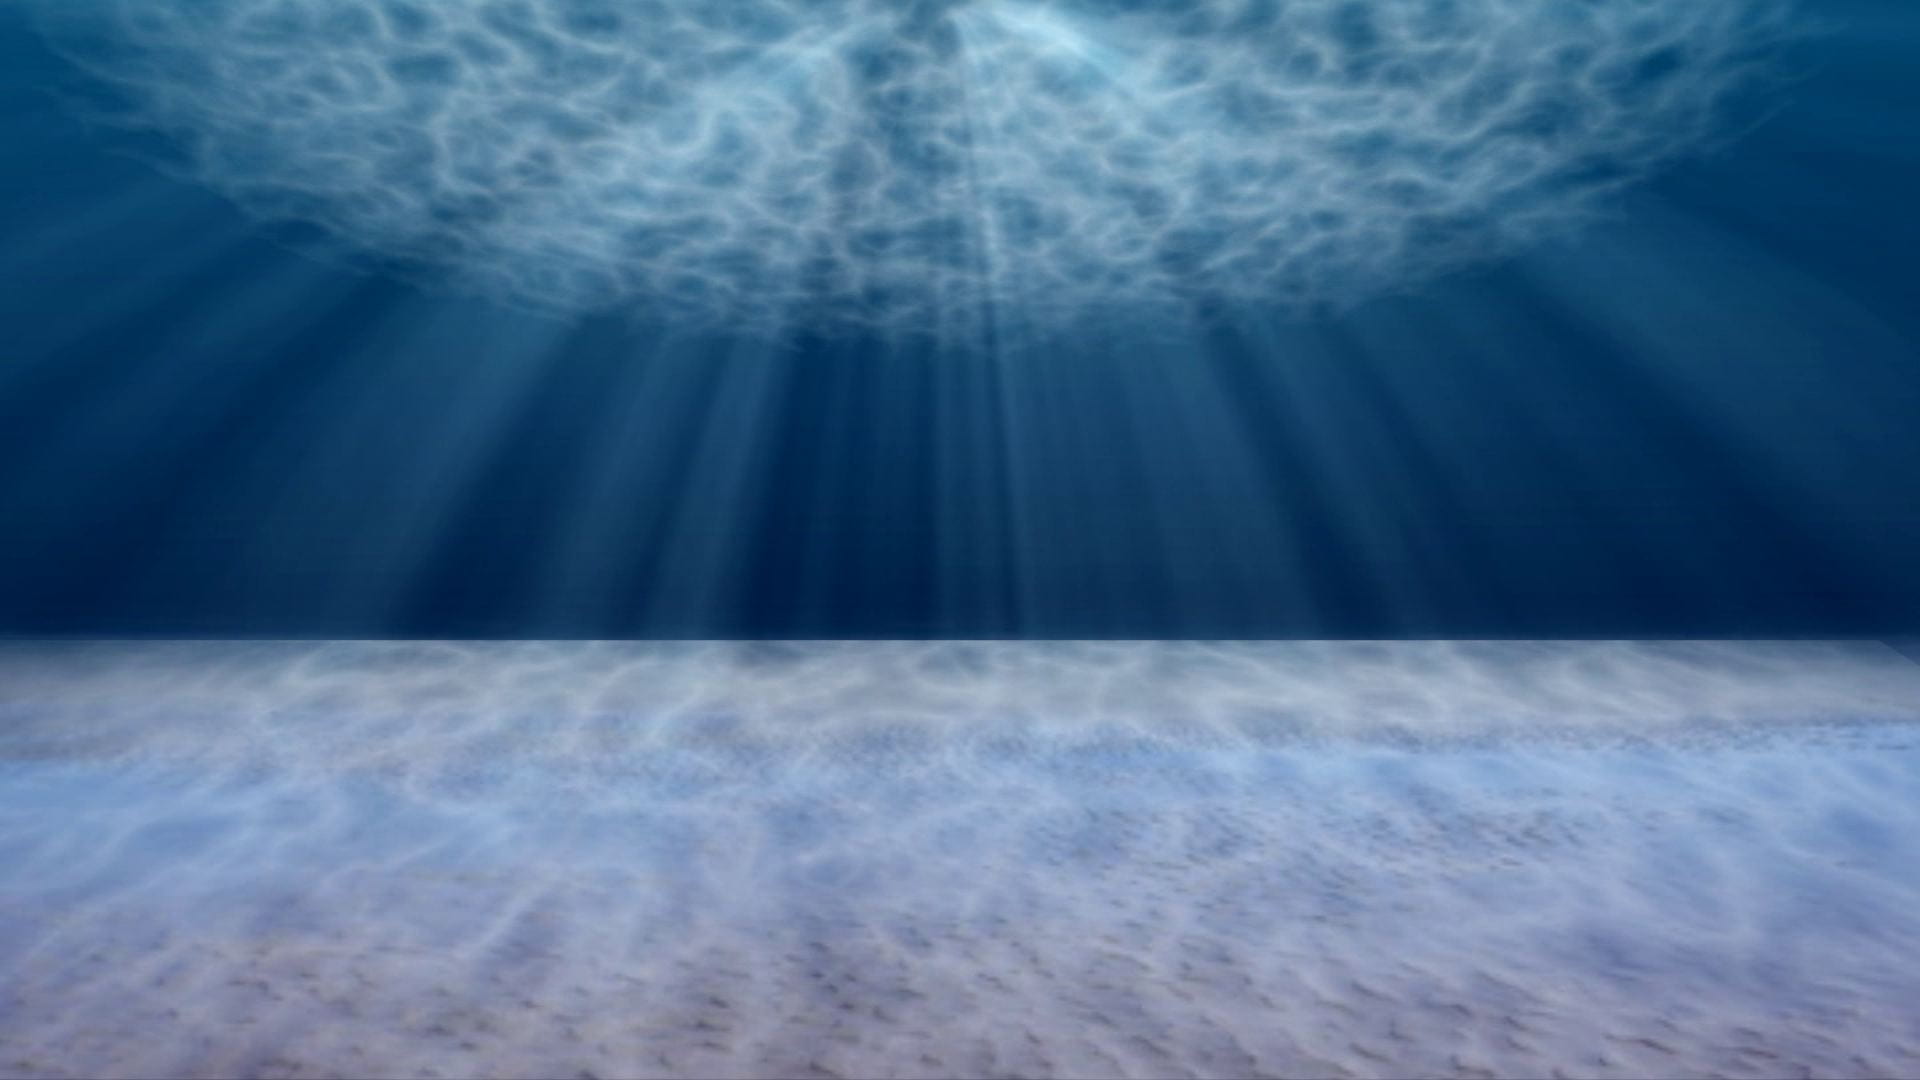 The underwater shot produced in Sony Vegas from scratch was made to imitate underwater scenes.